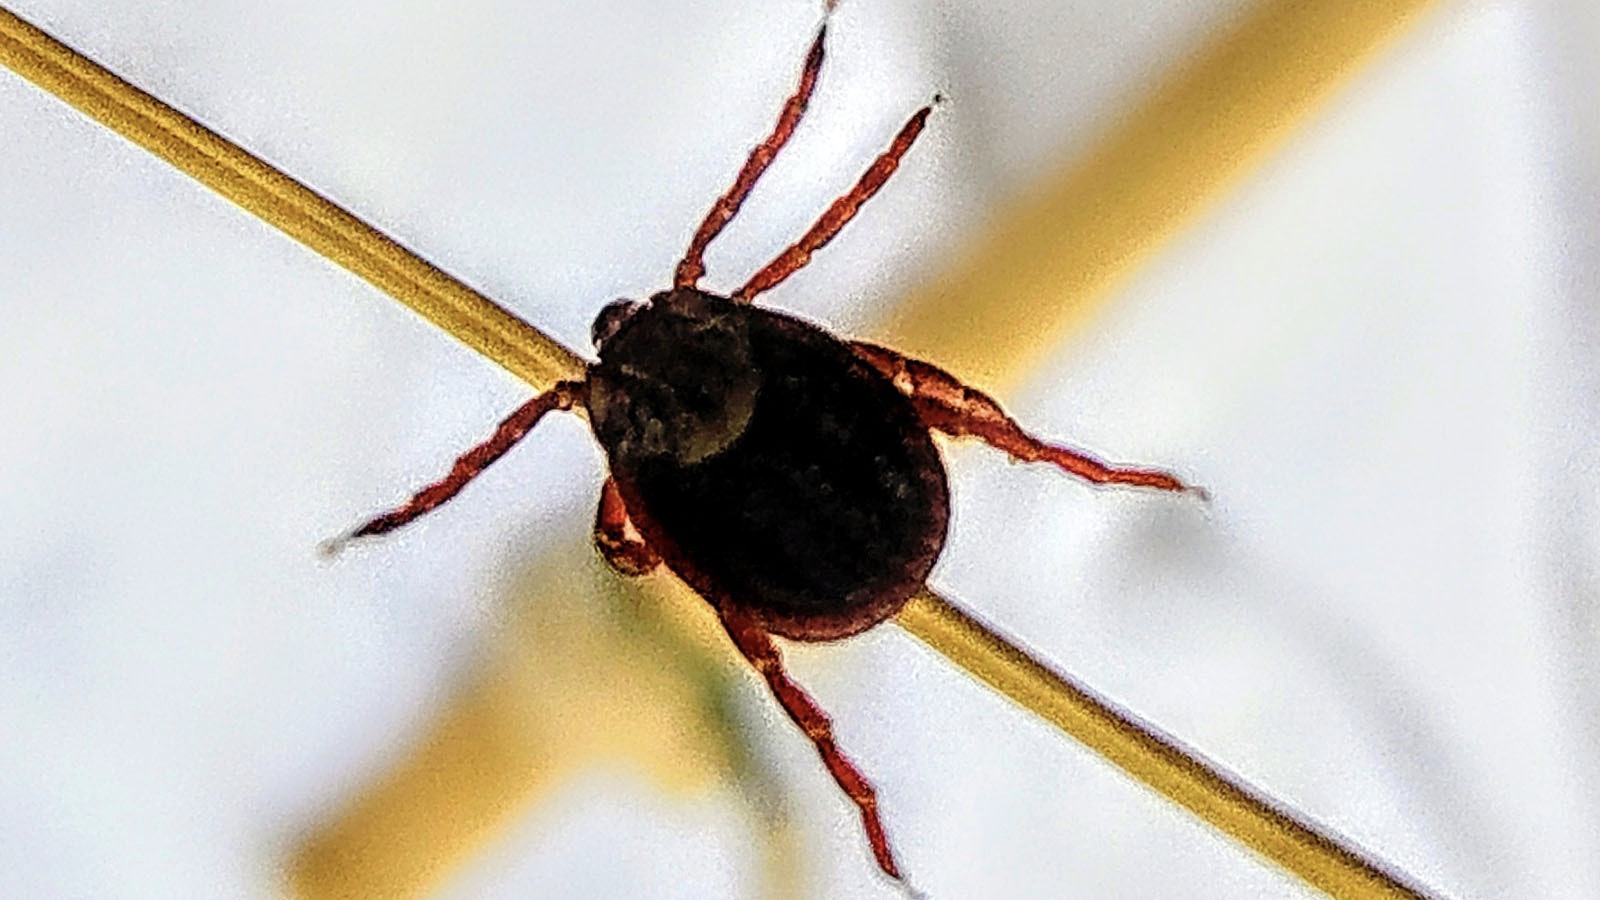 The Rocky Mountain wood tick is the most common species of tick in Wyoming.